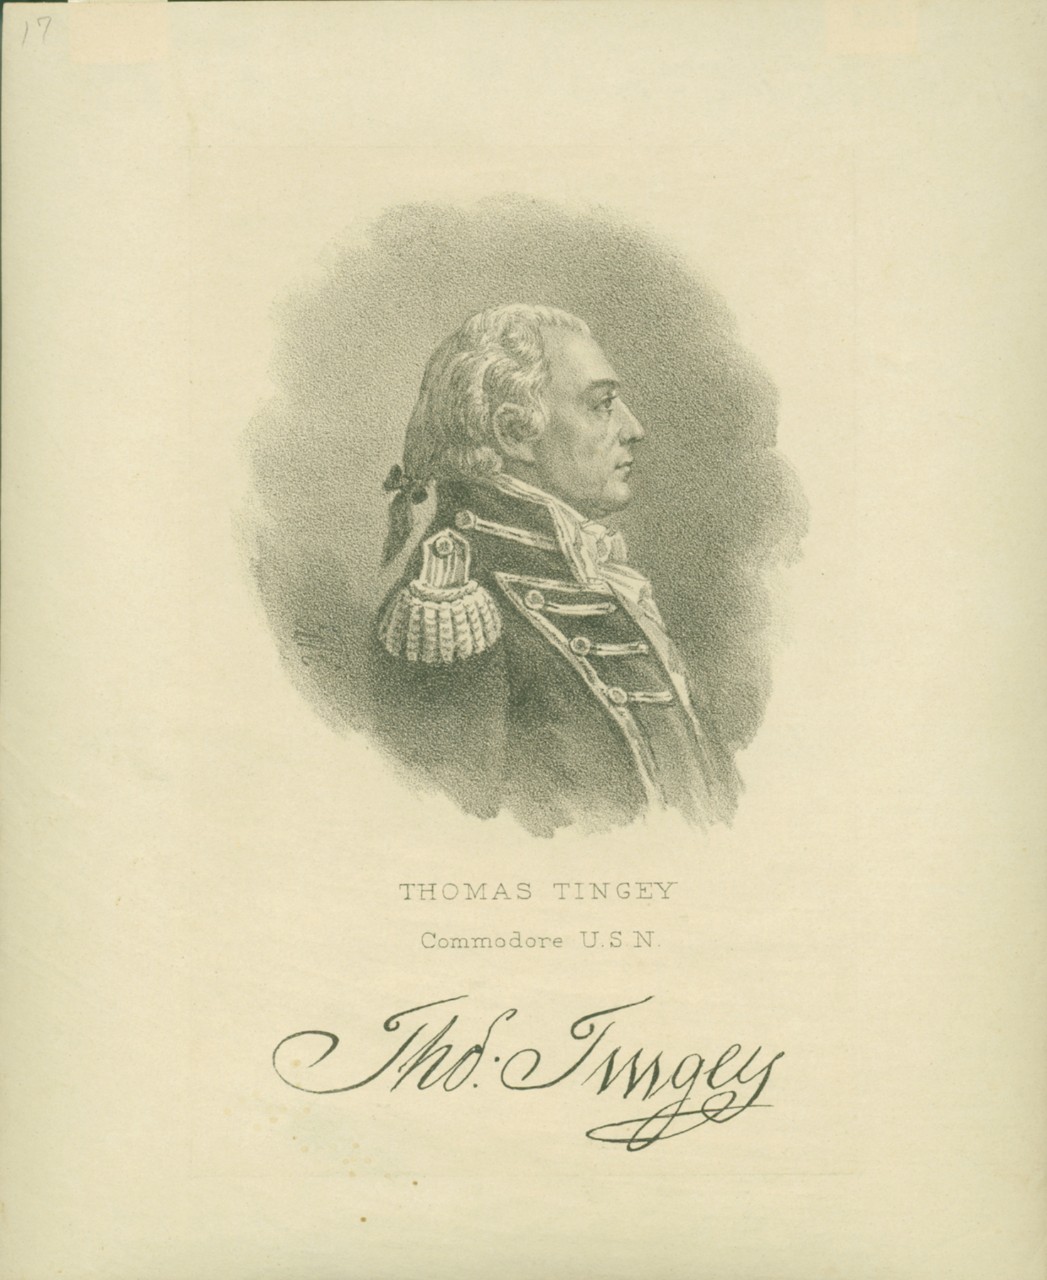 An oval profile portrait of Thomas Tingey, his signature is below